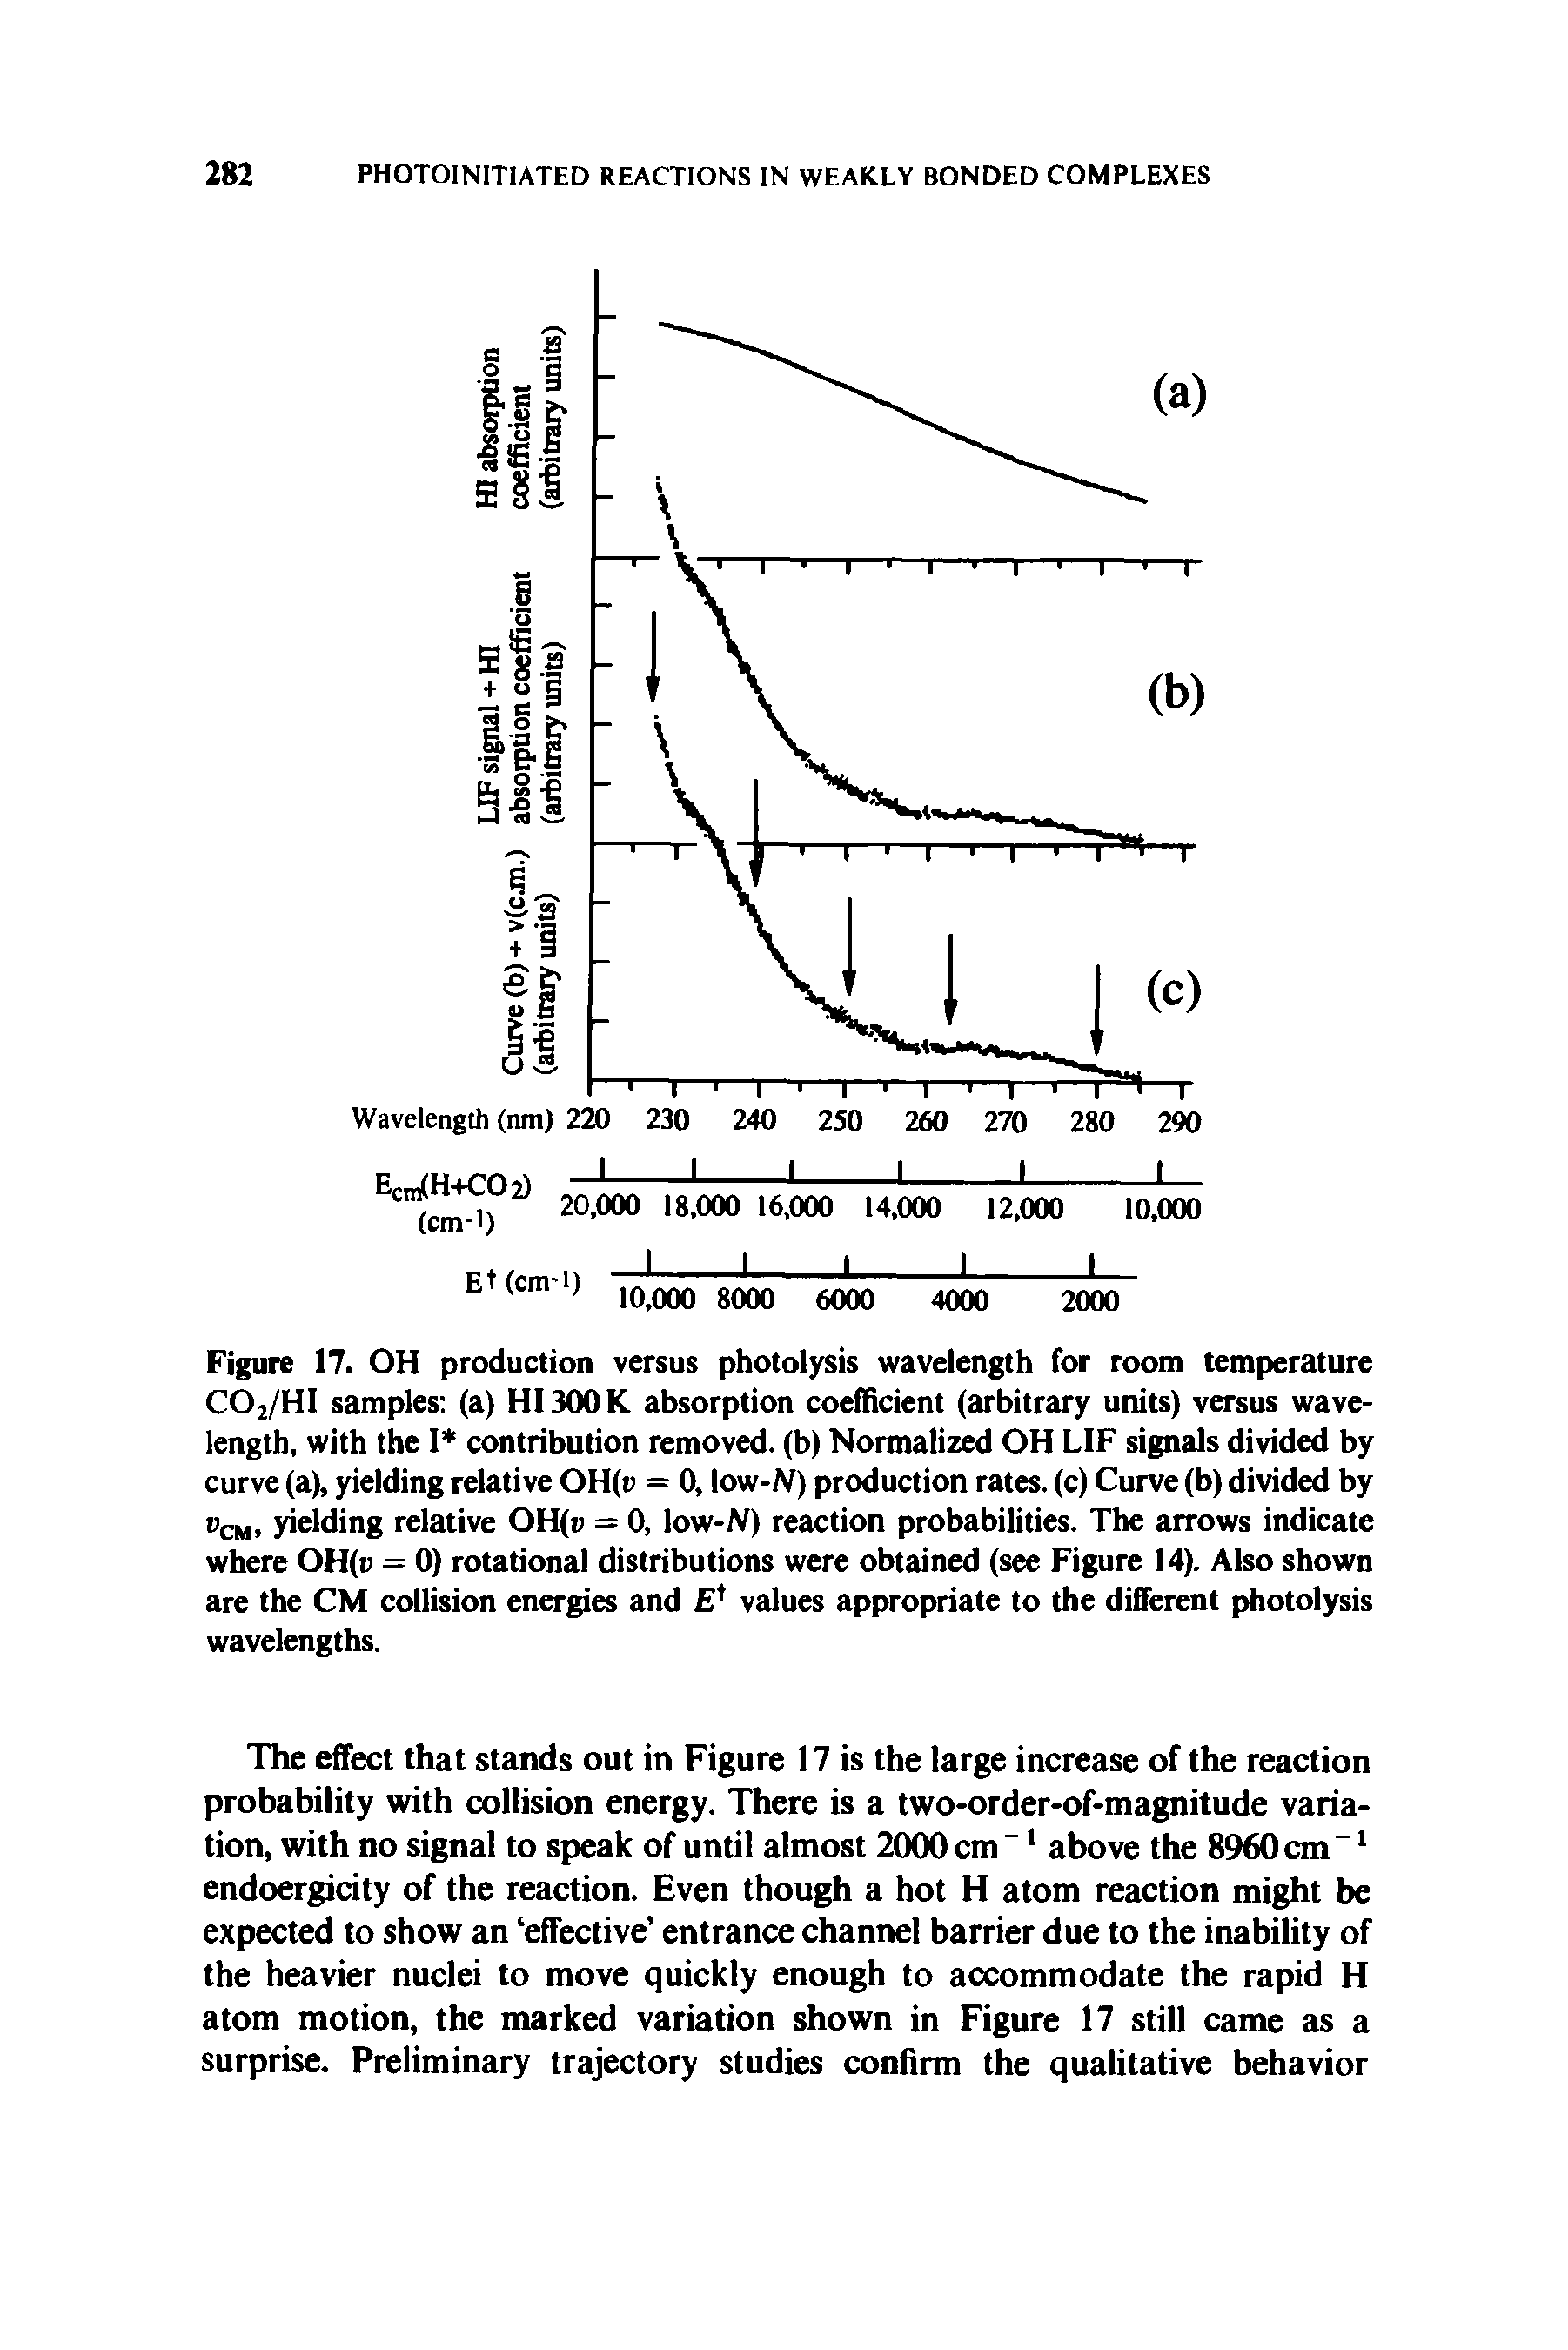 Figure 17. OH production versus photolysis wavelength for room temperature COj/HI samples (a) HI 300K absorption coefficient (arbitrary units) versus wavelength, with the I contribution removed, (b) Normalized OH LIF signals divided by curve (a), yielding relative OH(t) = 0, low-N) production rates, (c) Curve (b) divided by CM. yielding relative OH(b = 0, low-N) reaction probabilities. The arrows indicate where OH(v = 0) rotational distributions were obtained (see Figure 14). Also shown are the CM collision energies and E values appropriate to the different photolysis wavelengths.